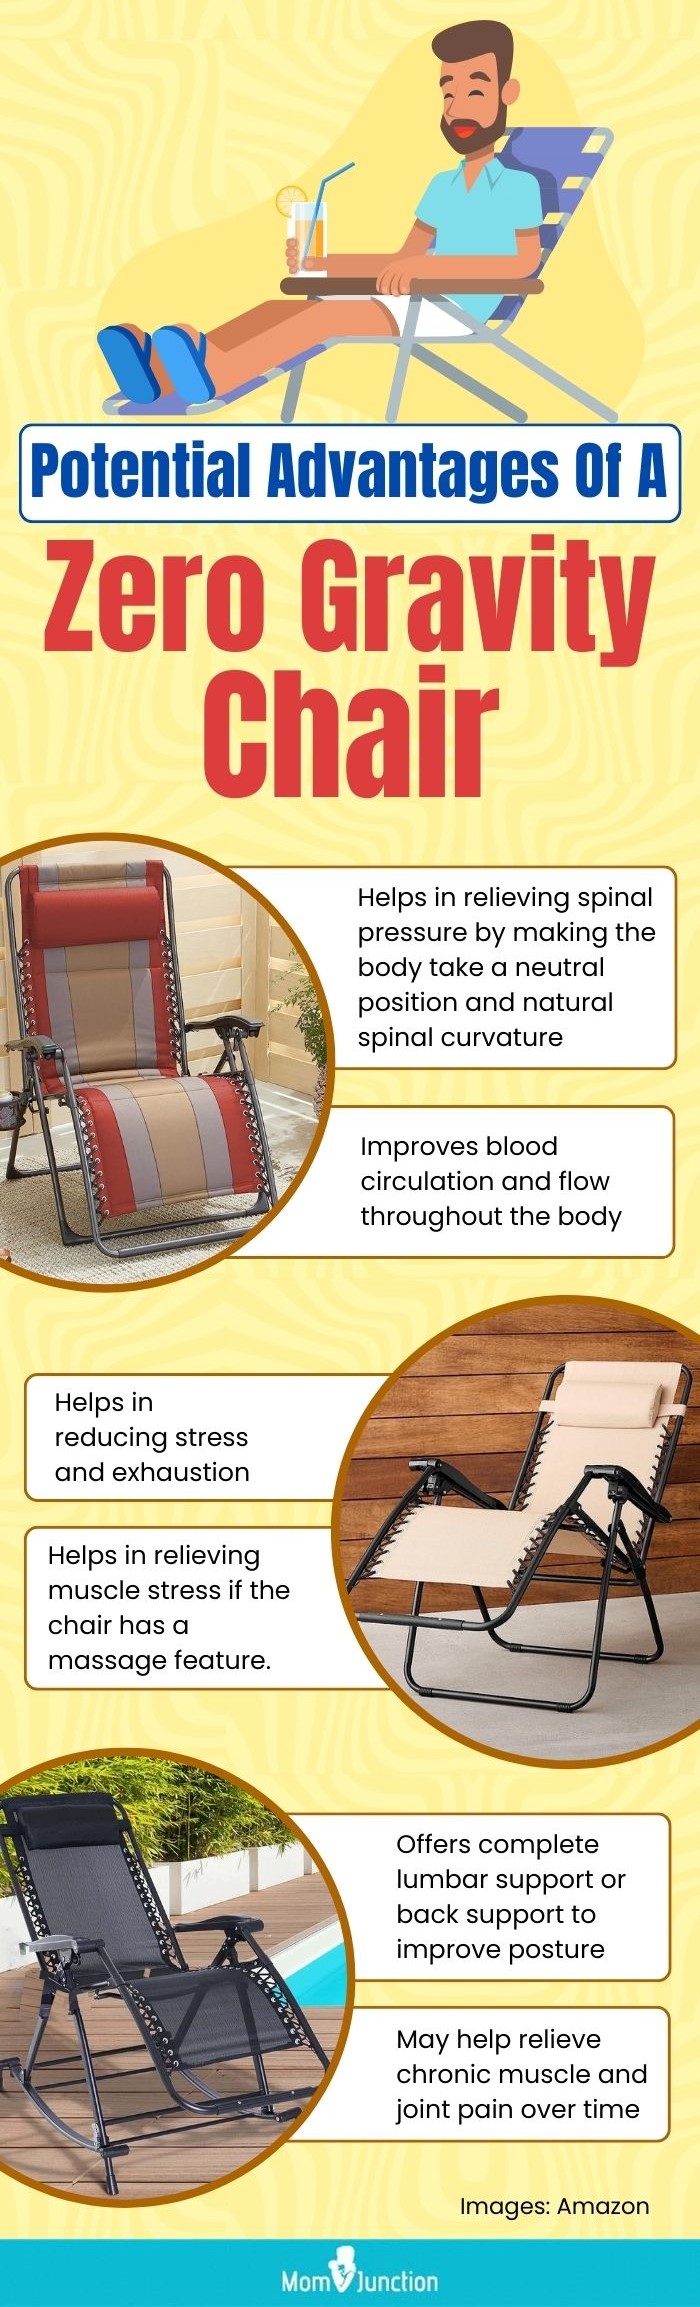 Potential Advantages Of Zero Gravity Chairs (infographic)